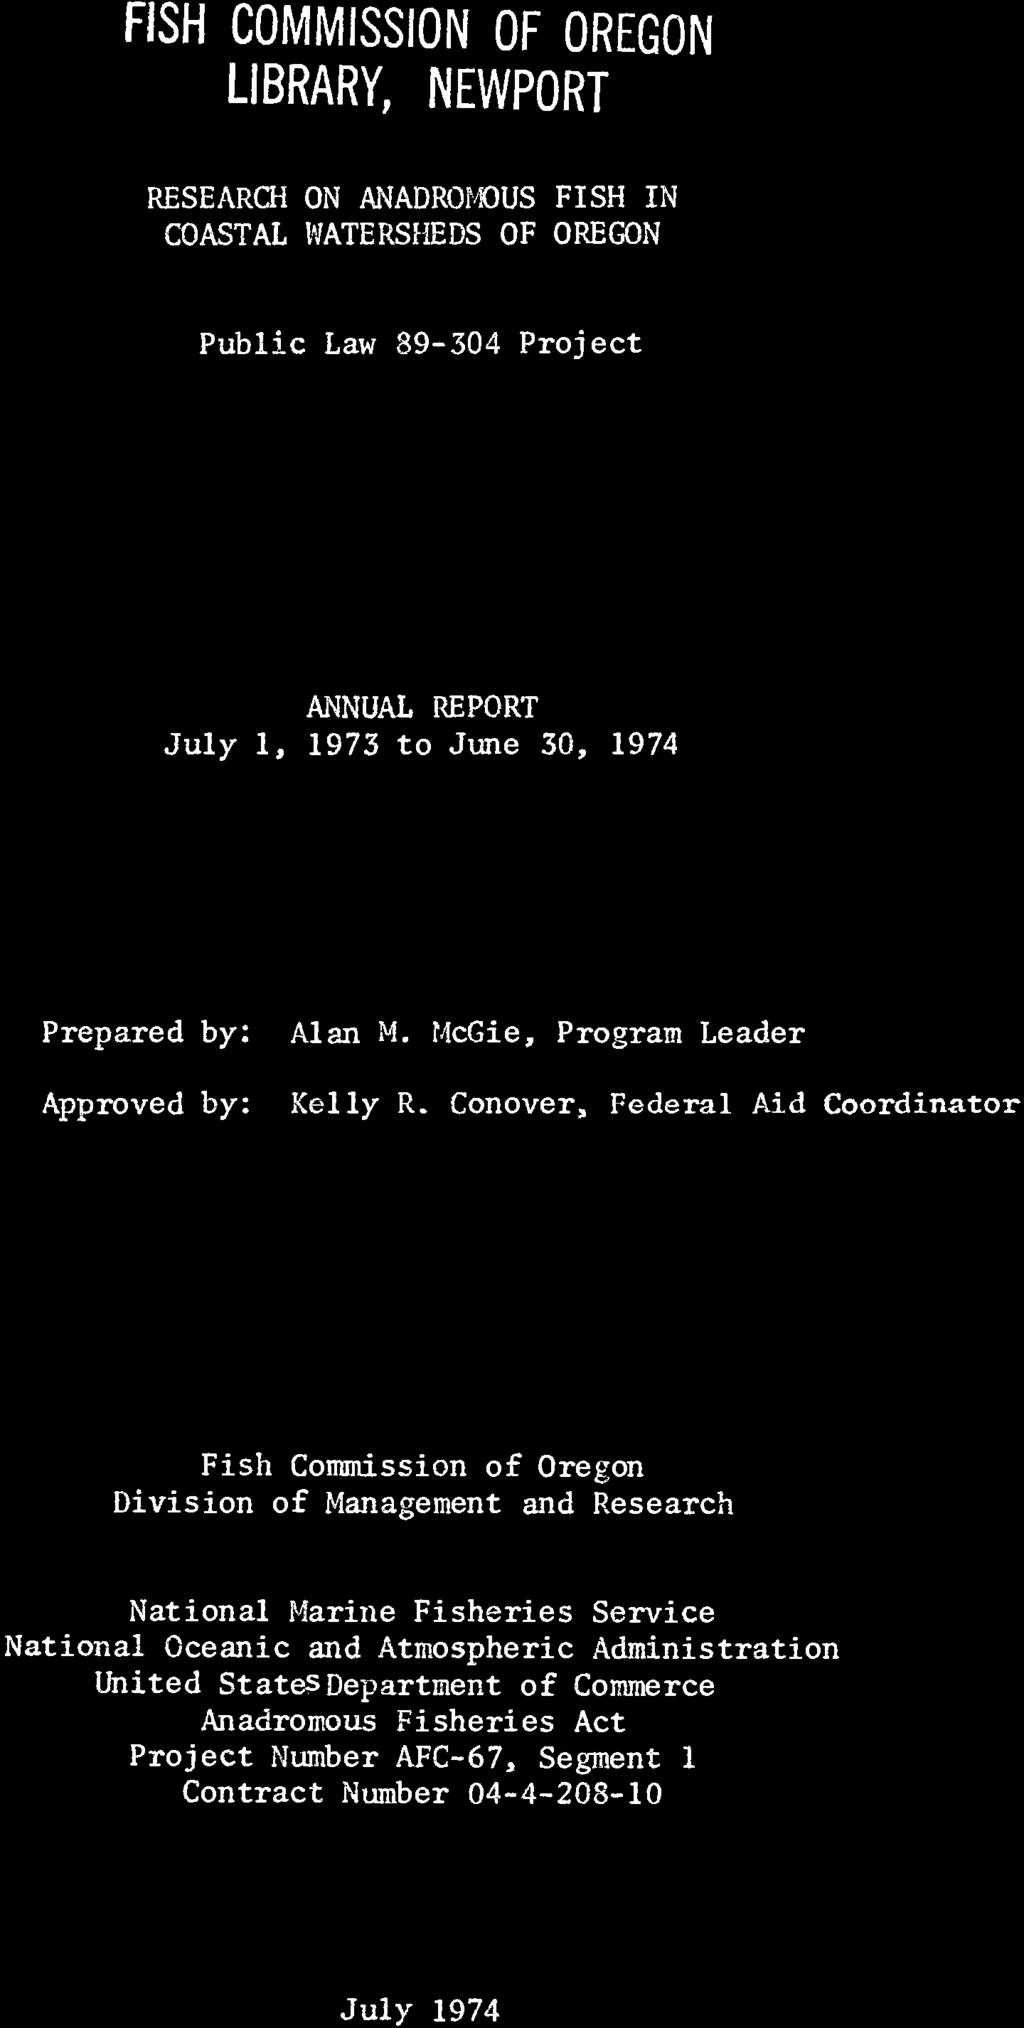 .p,y FISH COMMISSION OF OREGON LIBRARY, NEWPORT RESEARCH ON ANADROMOUS FISH IN COASTAL WATERSHEDS OF OREGON Public Law 89-304 Project ANNUAL REPORT July 1, 1973